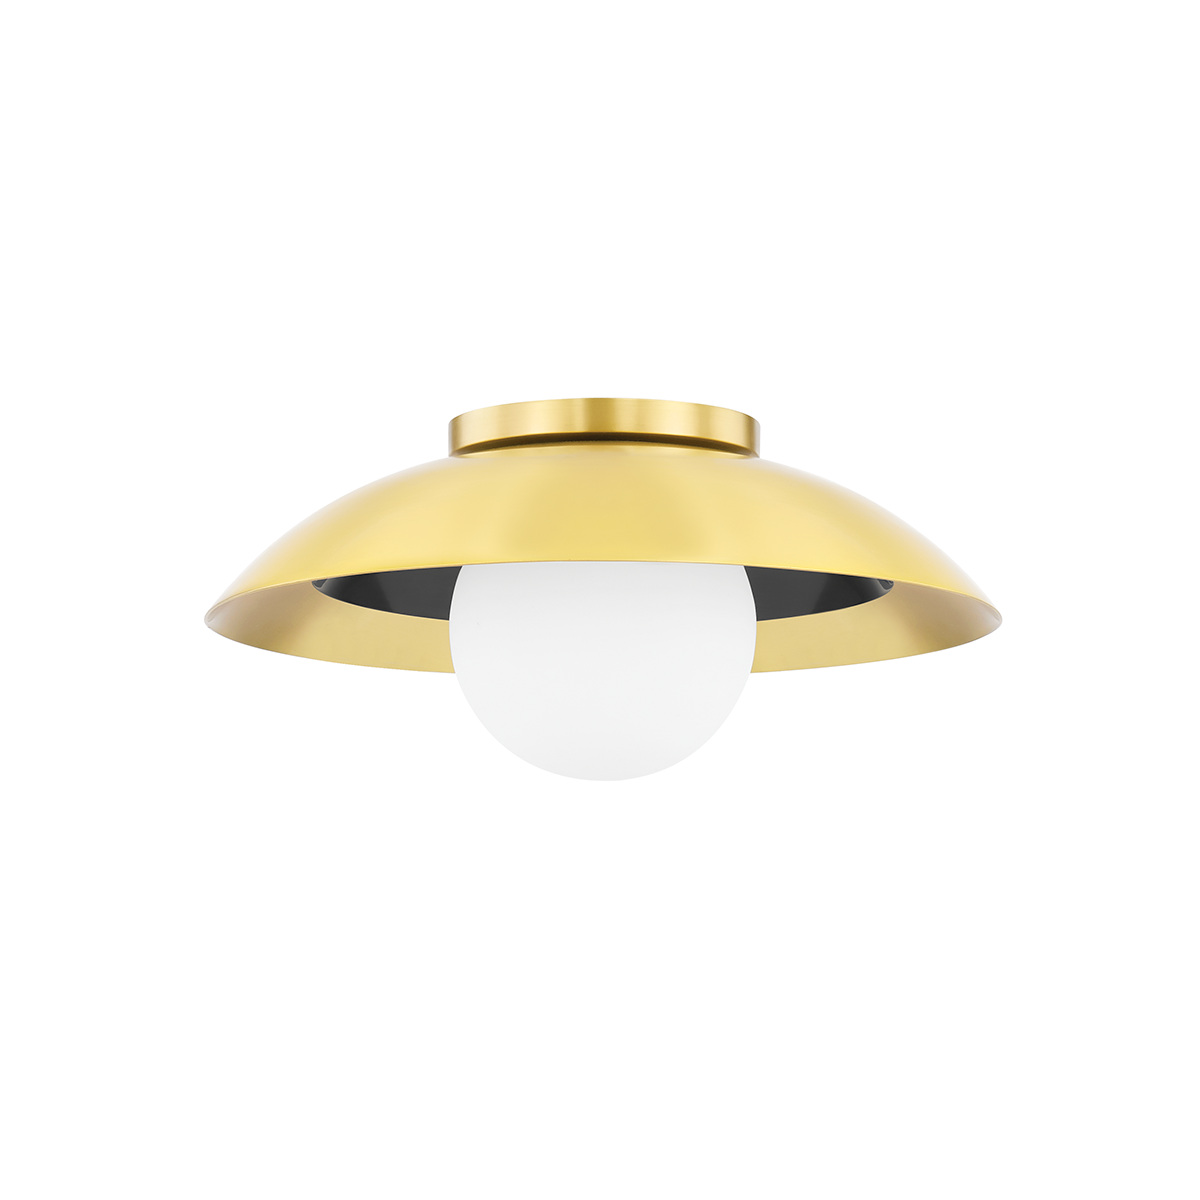 Tobia 1 Light Wall Sconce